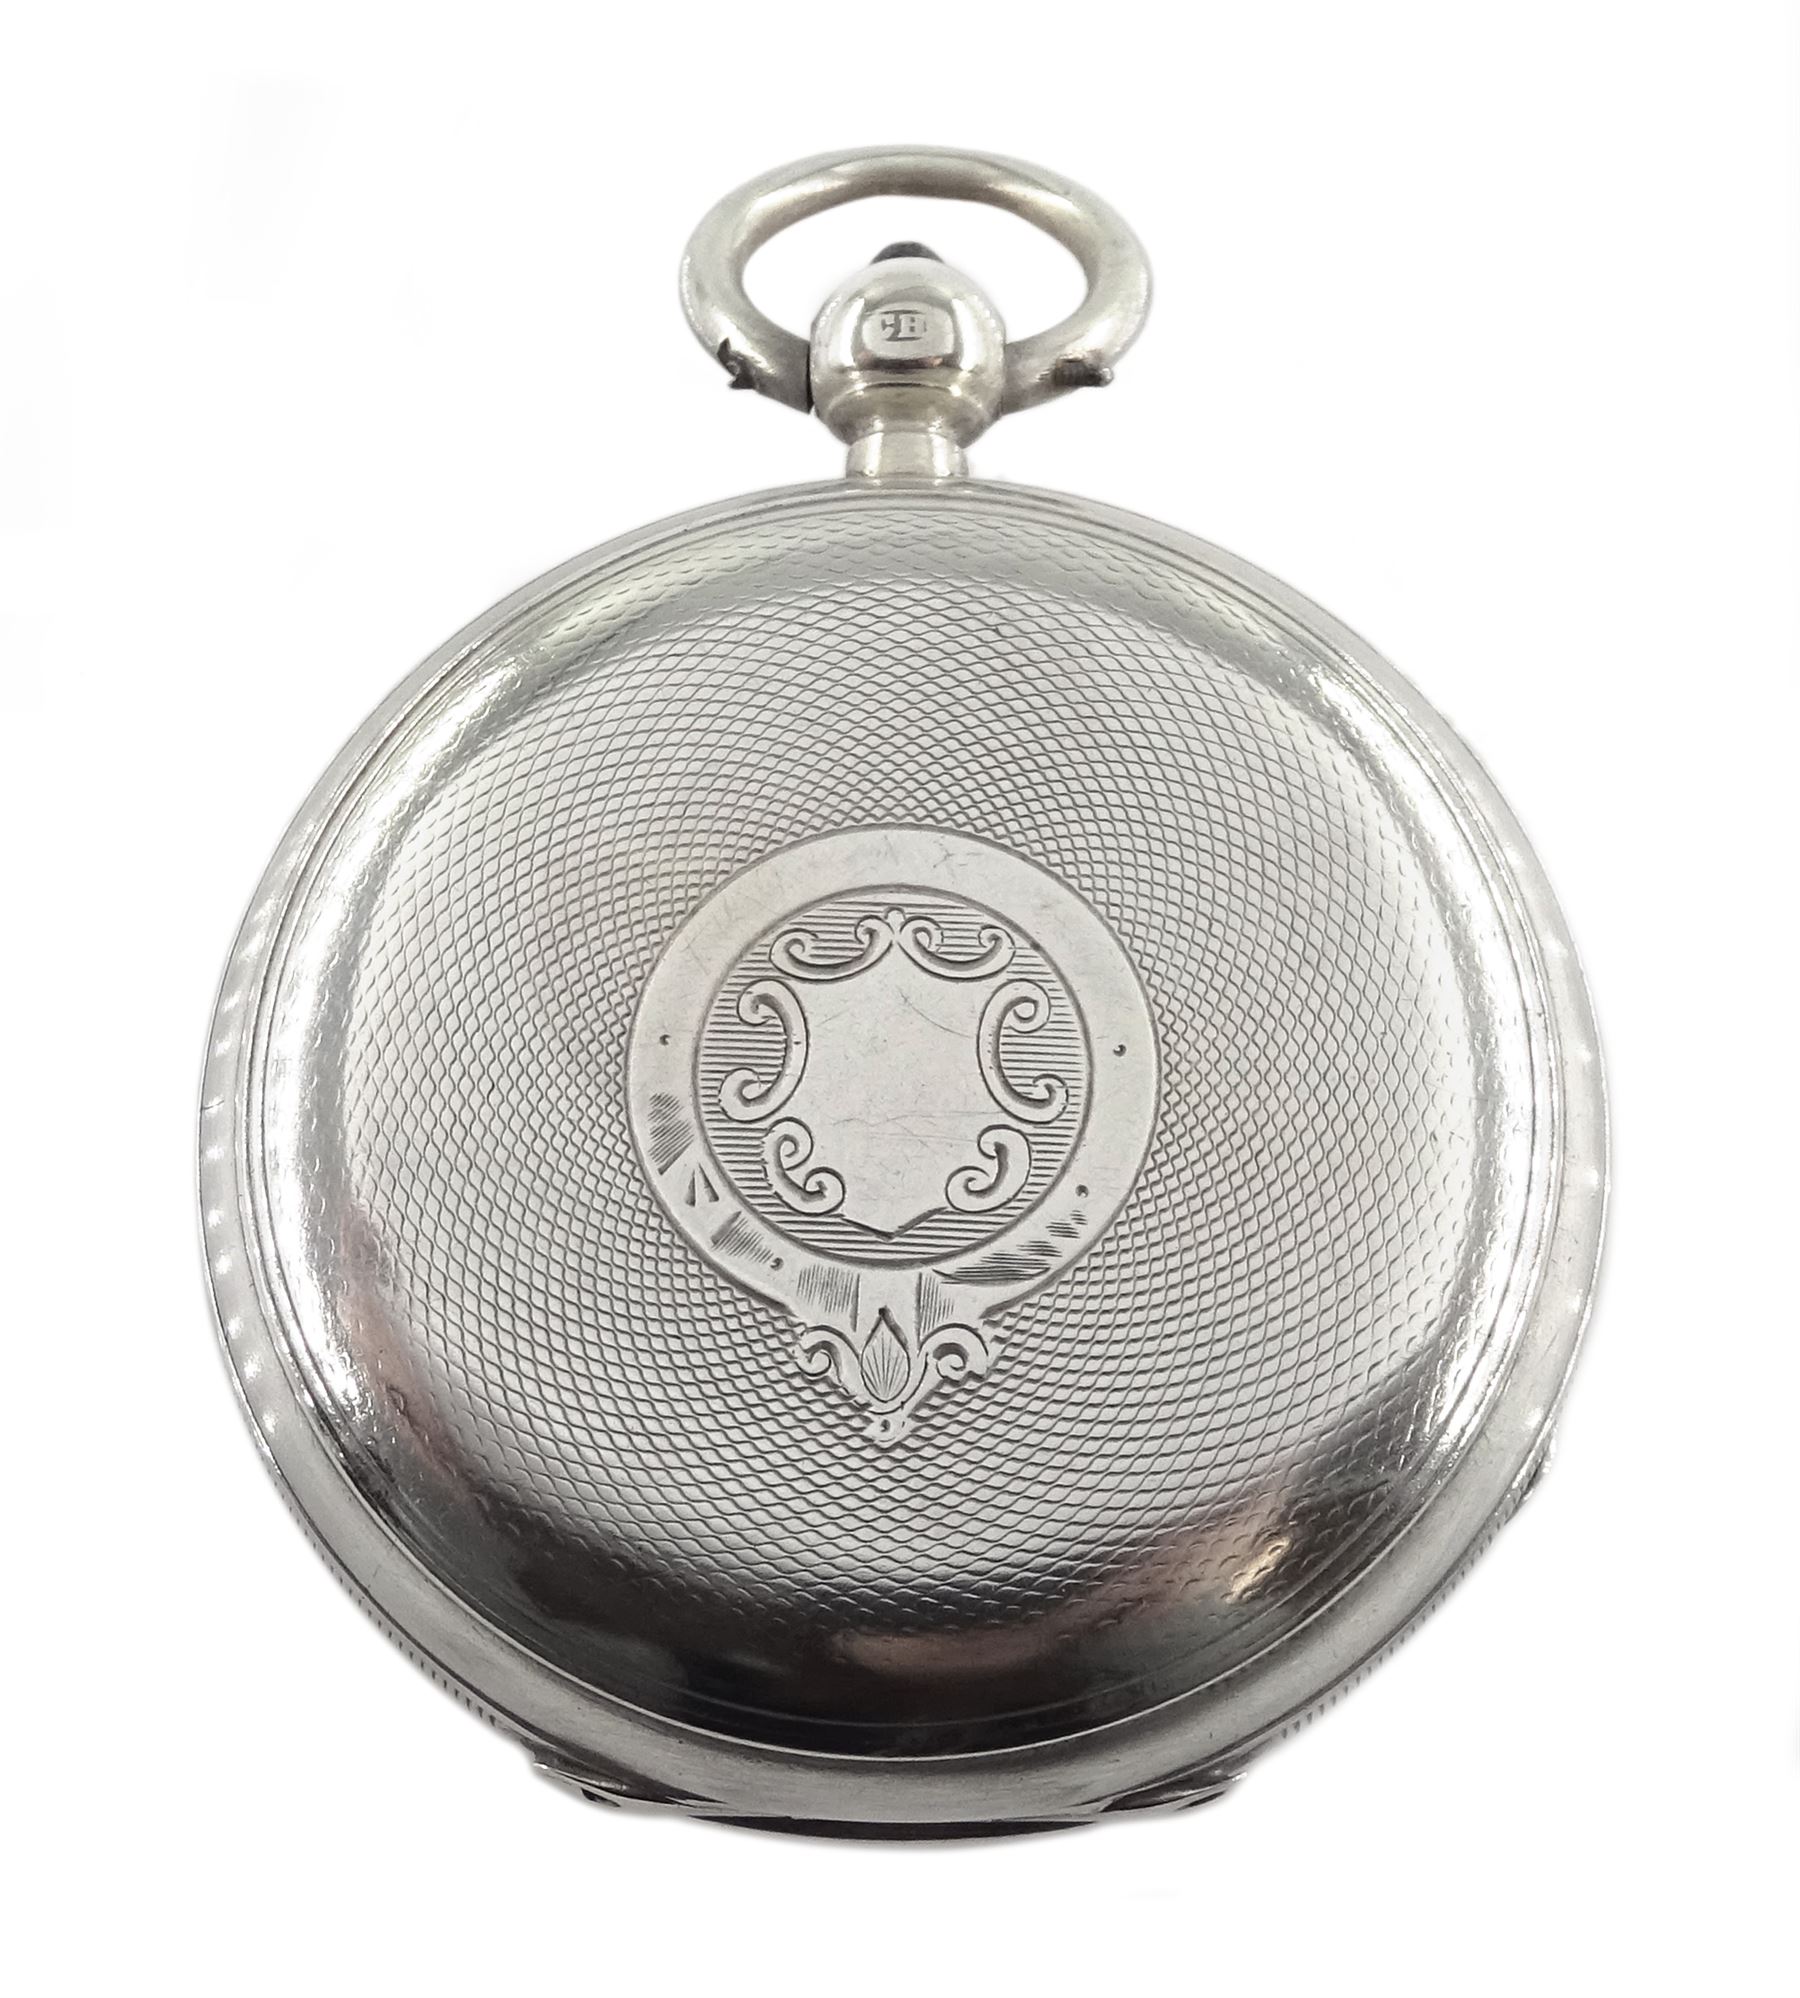 Victorian silver open face English lever fusee pocket watch by Cowans - Image 2 of 5